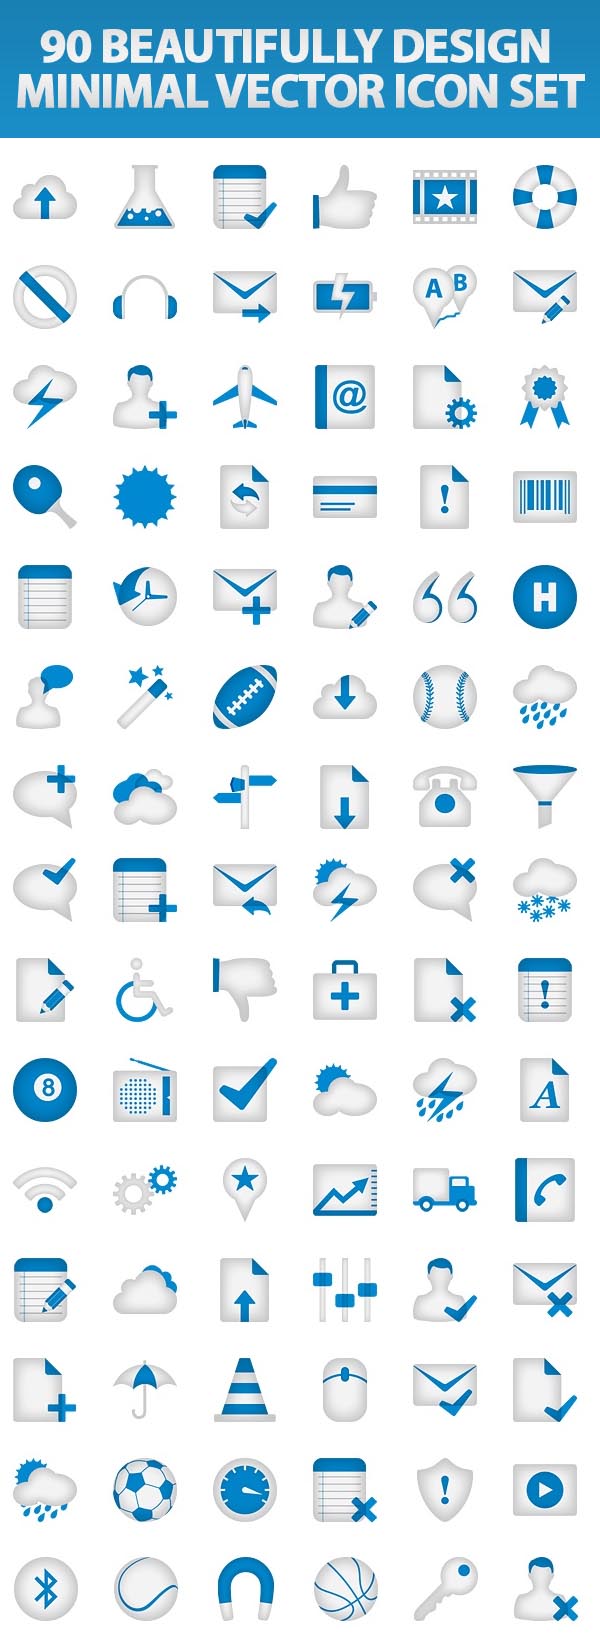 Free Vector Icons Pack 3